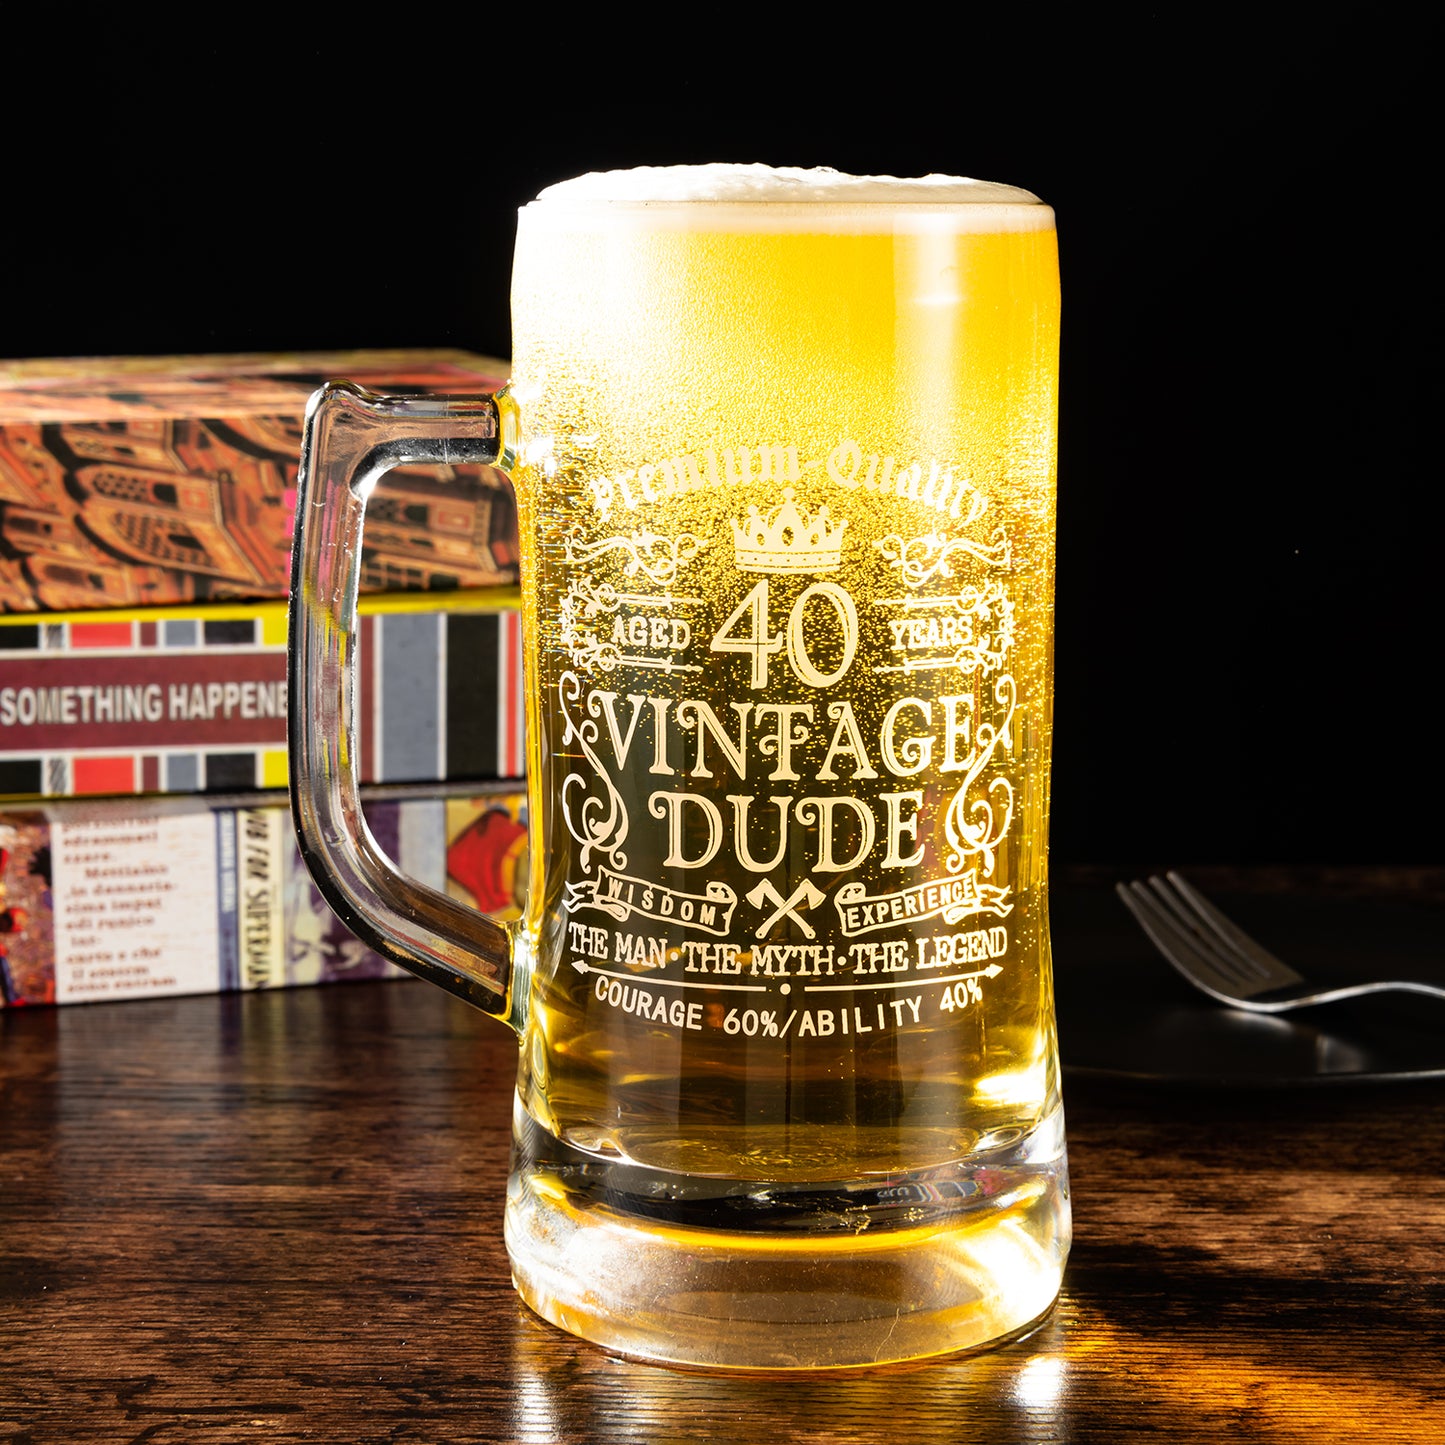 Crisky 40th Birthday Vintage Dude Beer Mug for Men 40 Years Old Gift 21 oz Birthday Beer Glass for Him, Husband, Father, Brother Friends Uncle Coworker, Large Capacity Beer Mug Gift, with Box